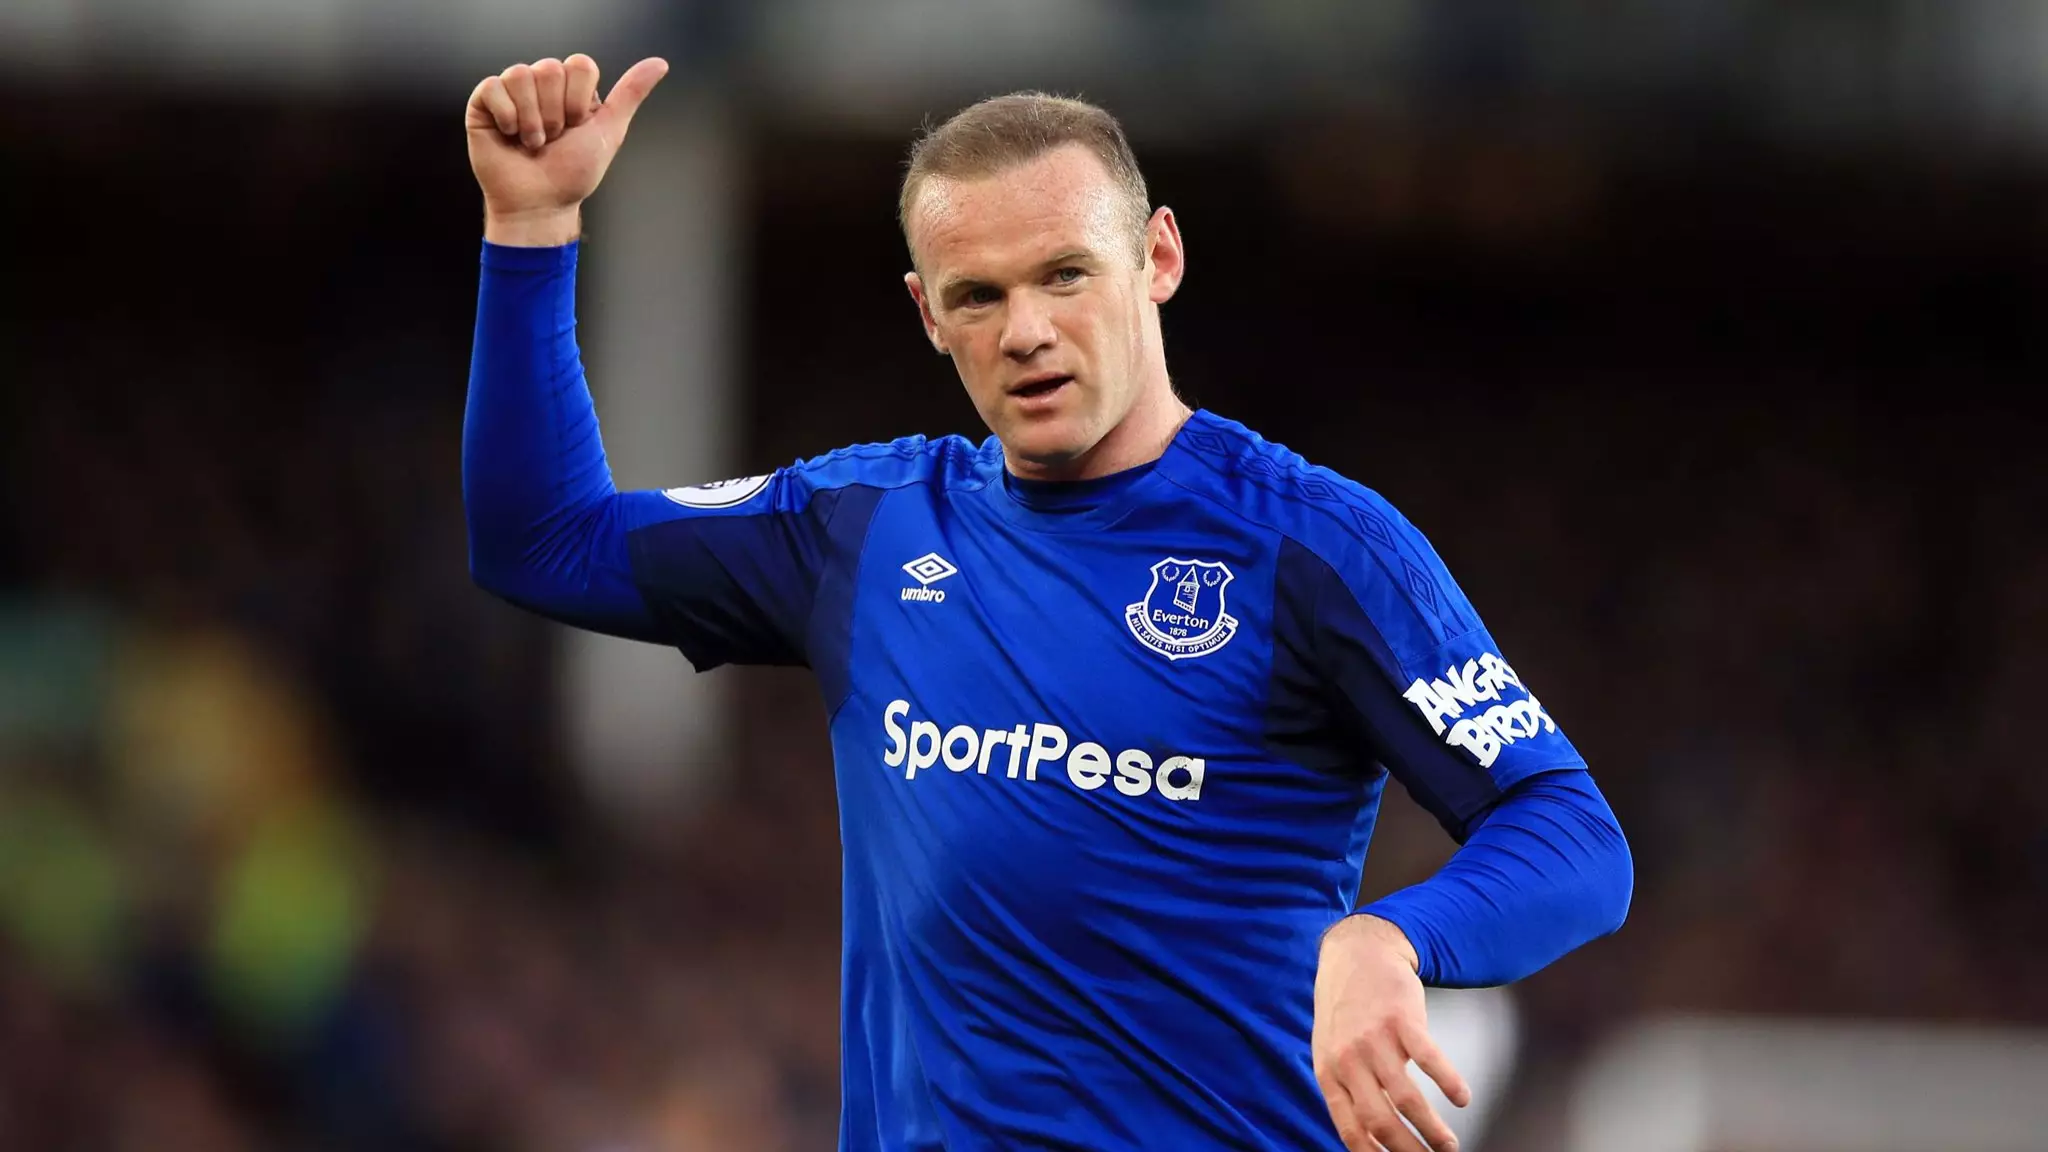 Everton Ready To Sell Wayne Rooney In Summer Overhaul 